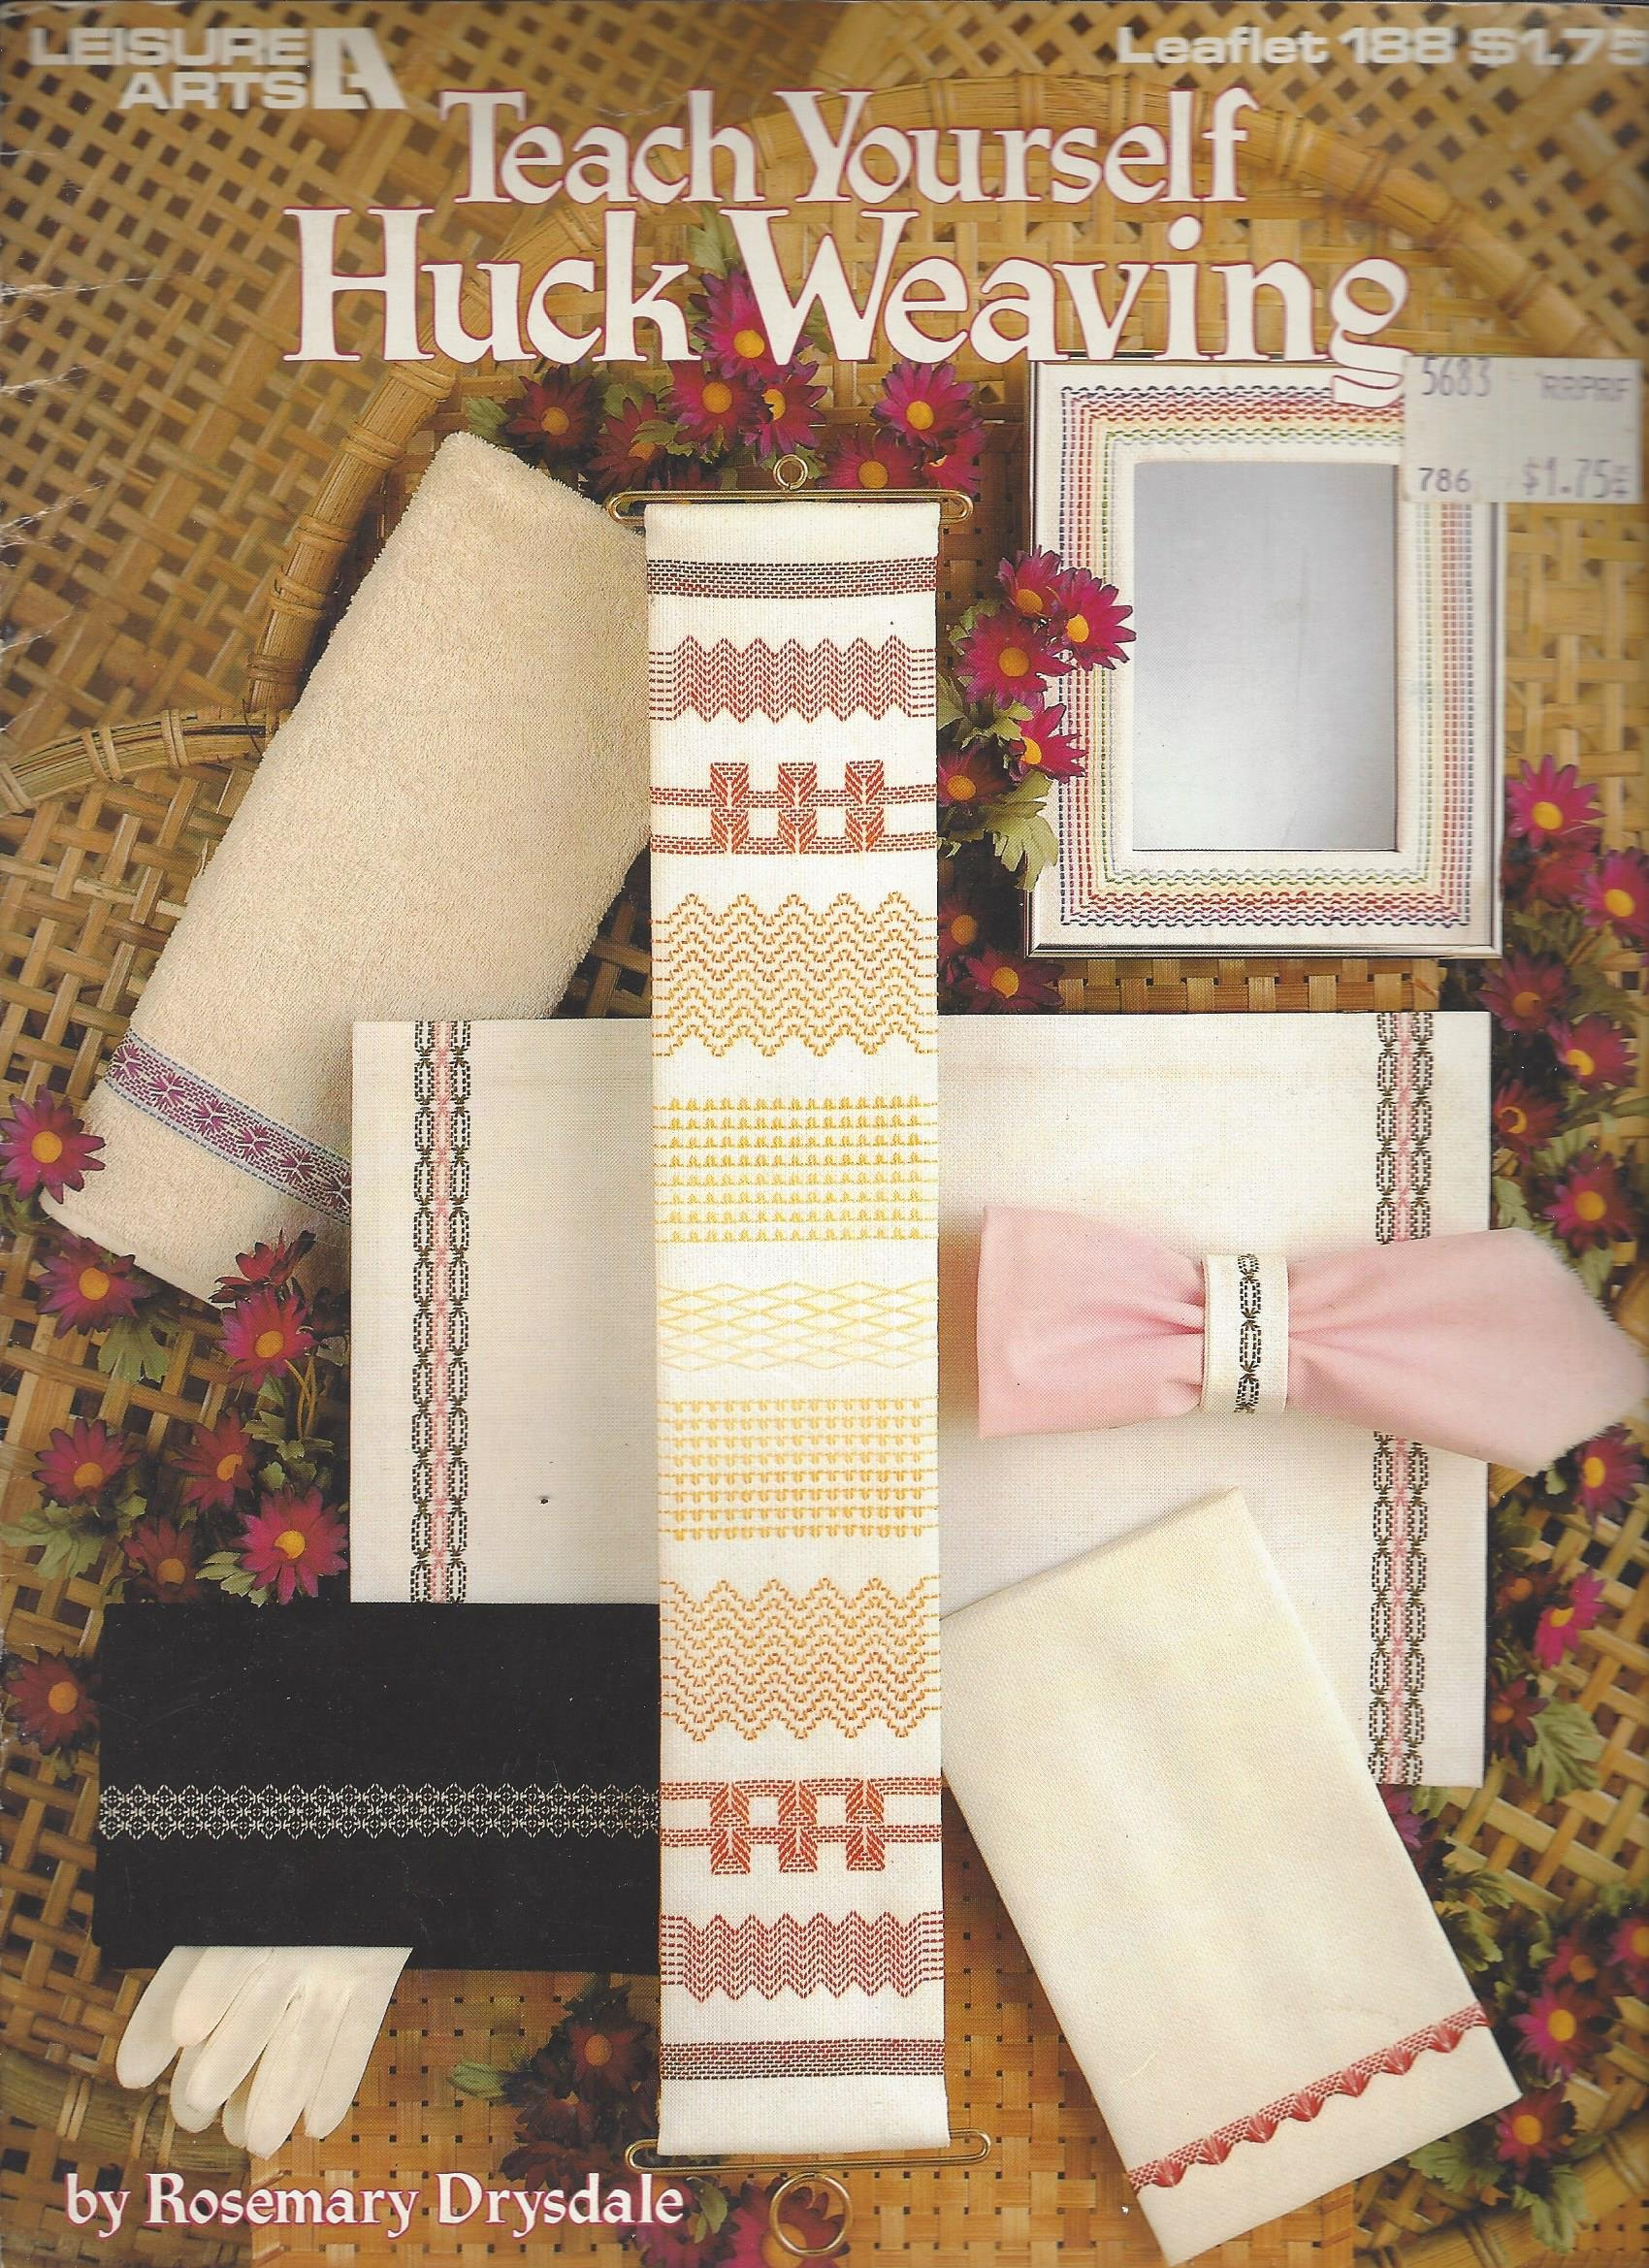 Huck Embroidery Free Patterns Huck Weaving Swedish Embroidery Free Embroidery Patterns